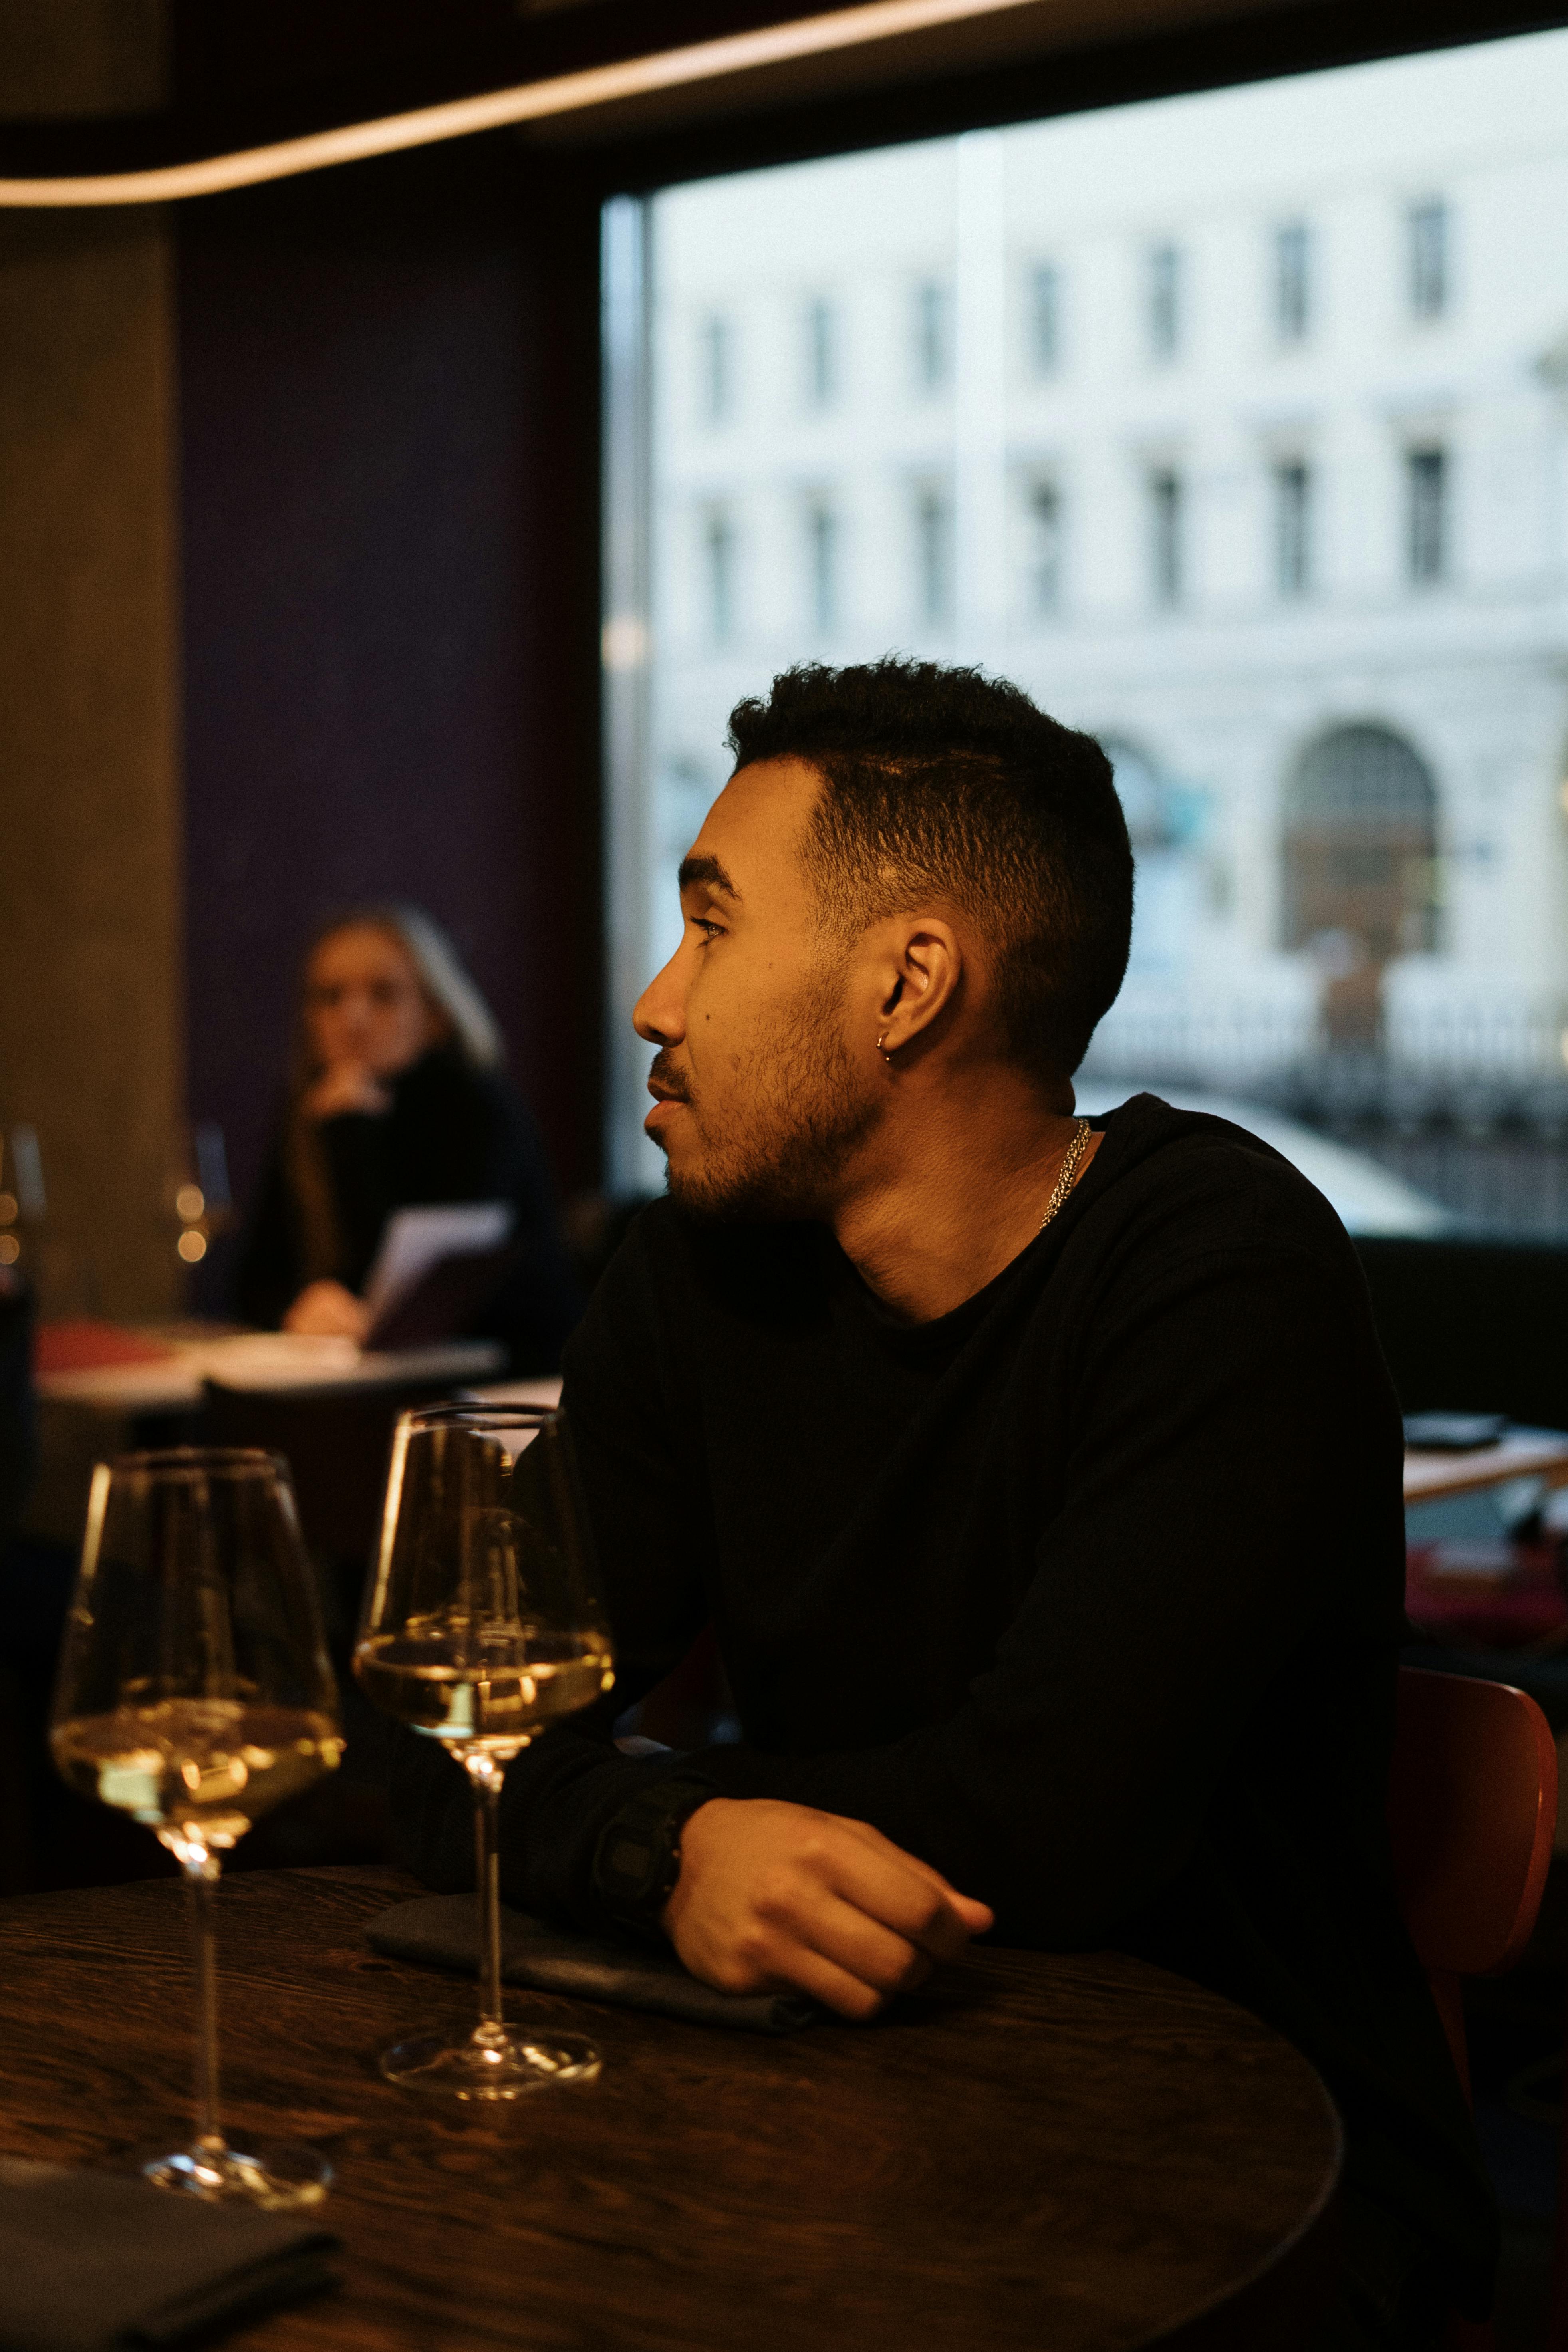 Man sitting beside the table with wine glass. | Photo: Pexels